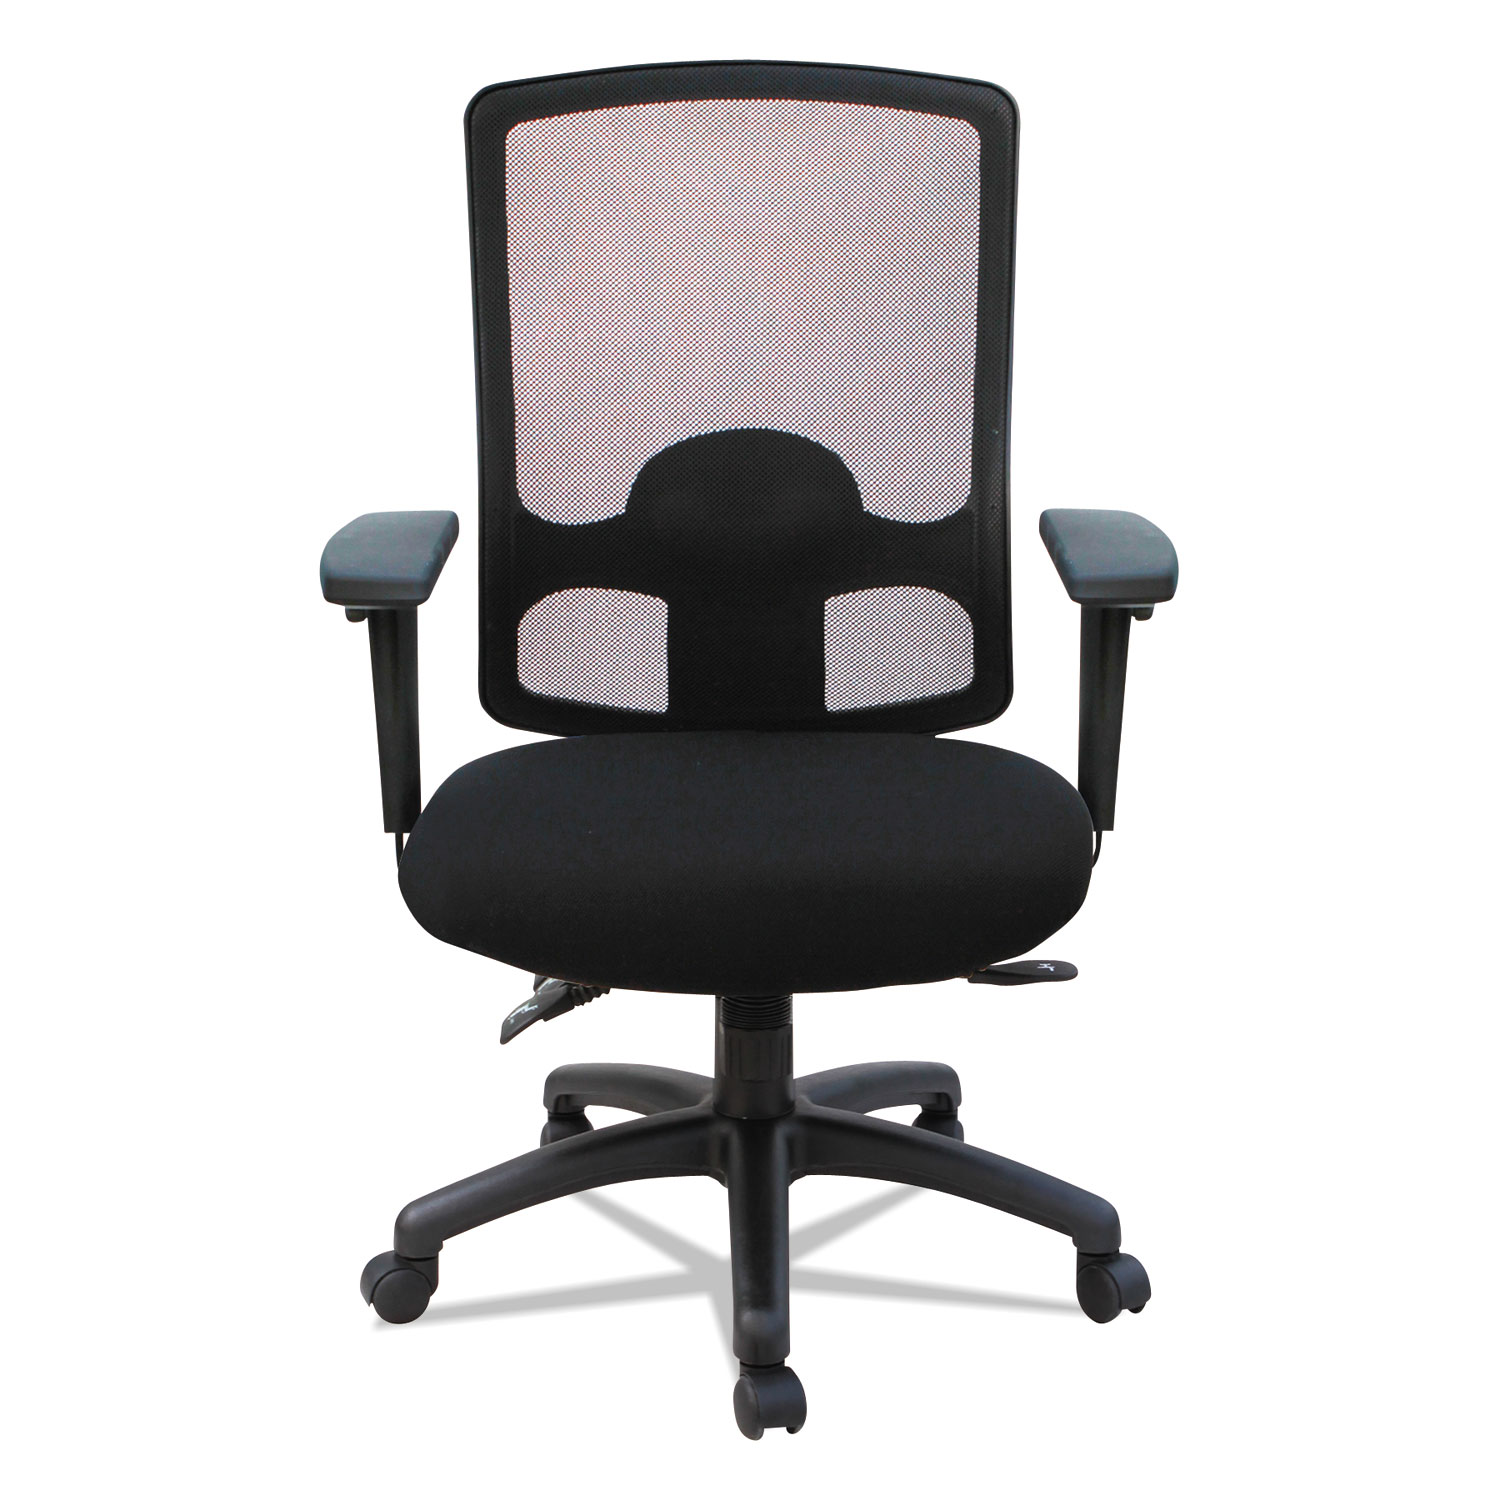 Etros Series High-Back Multifunction with Seat Slide Chair, Black